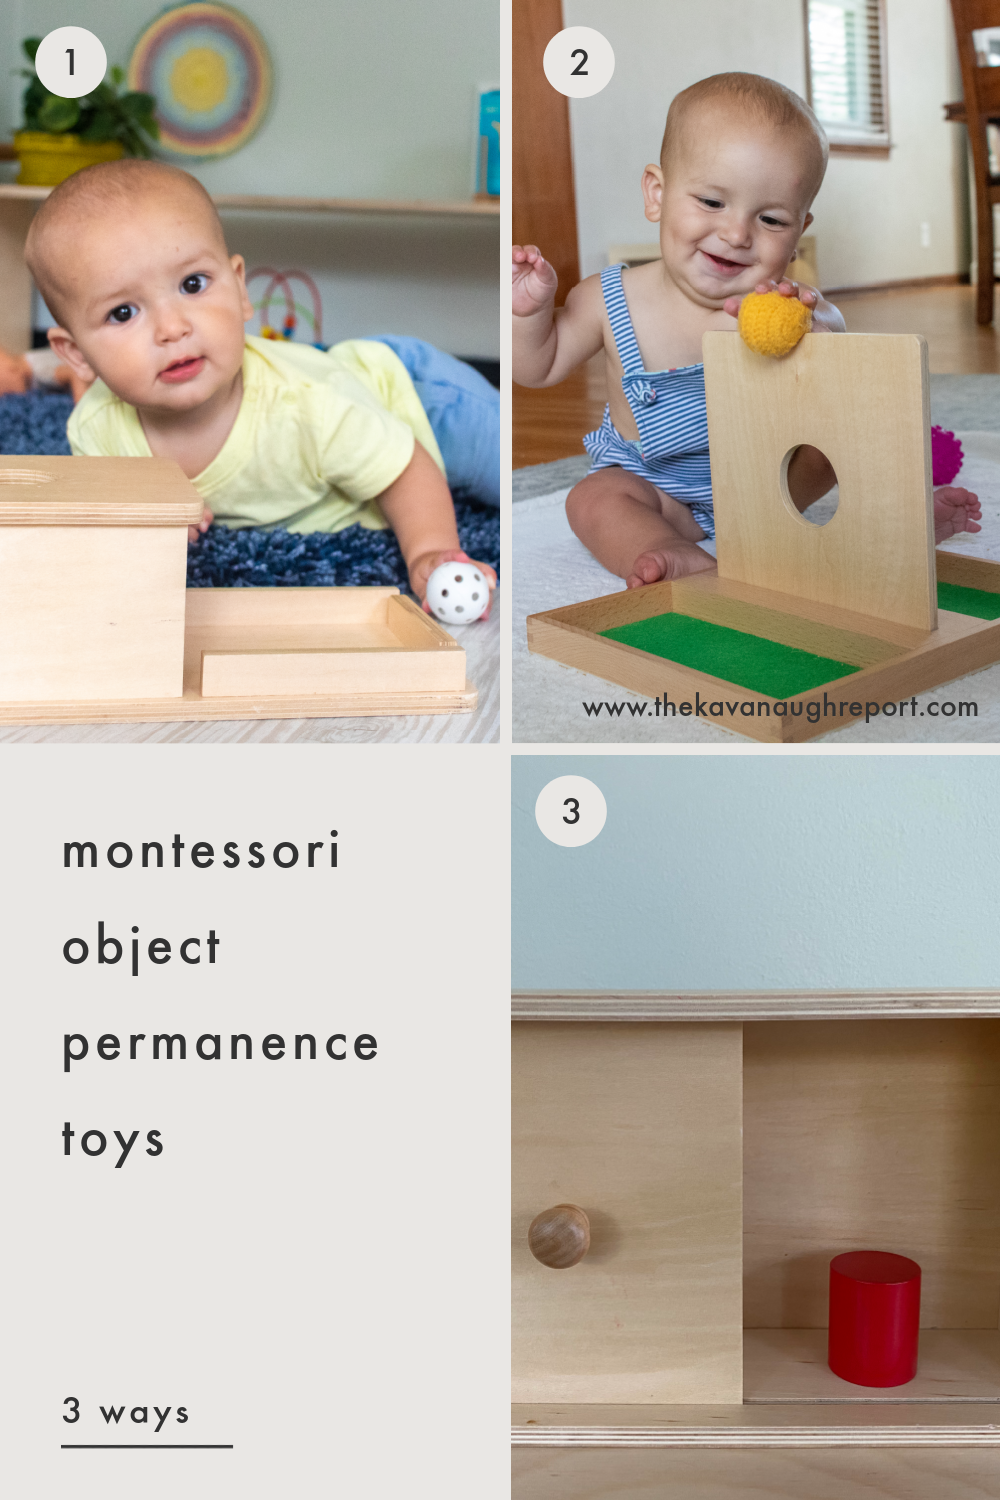 When Does A Baby Develop Object Permanence?